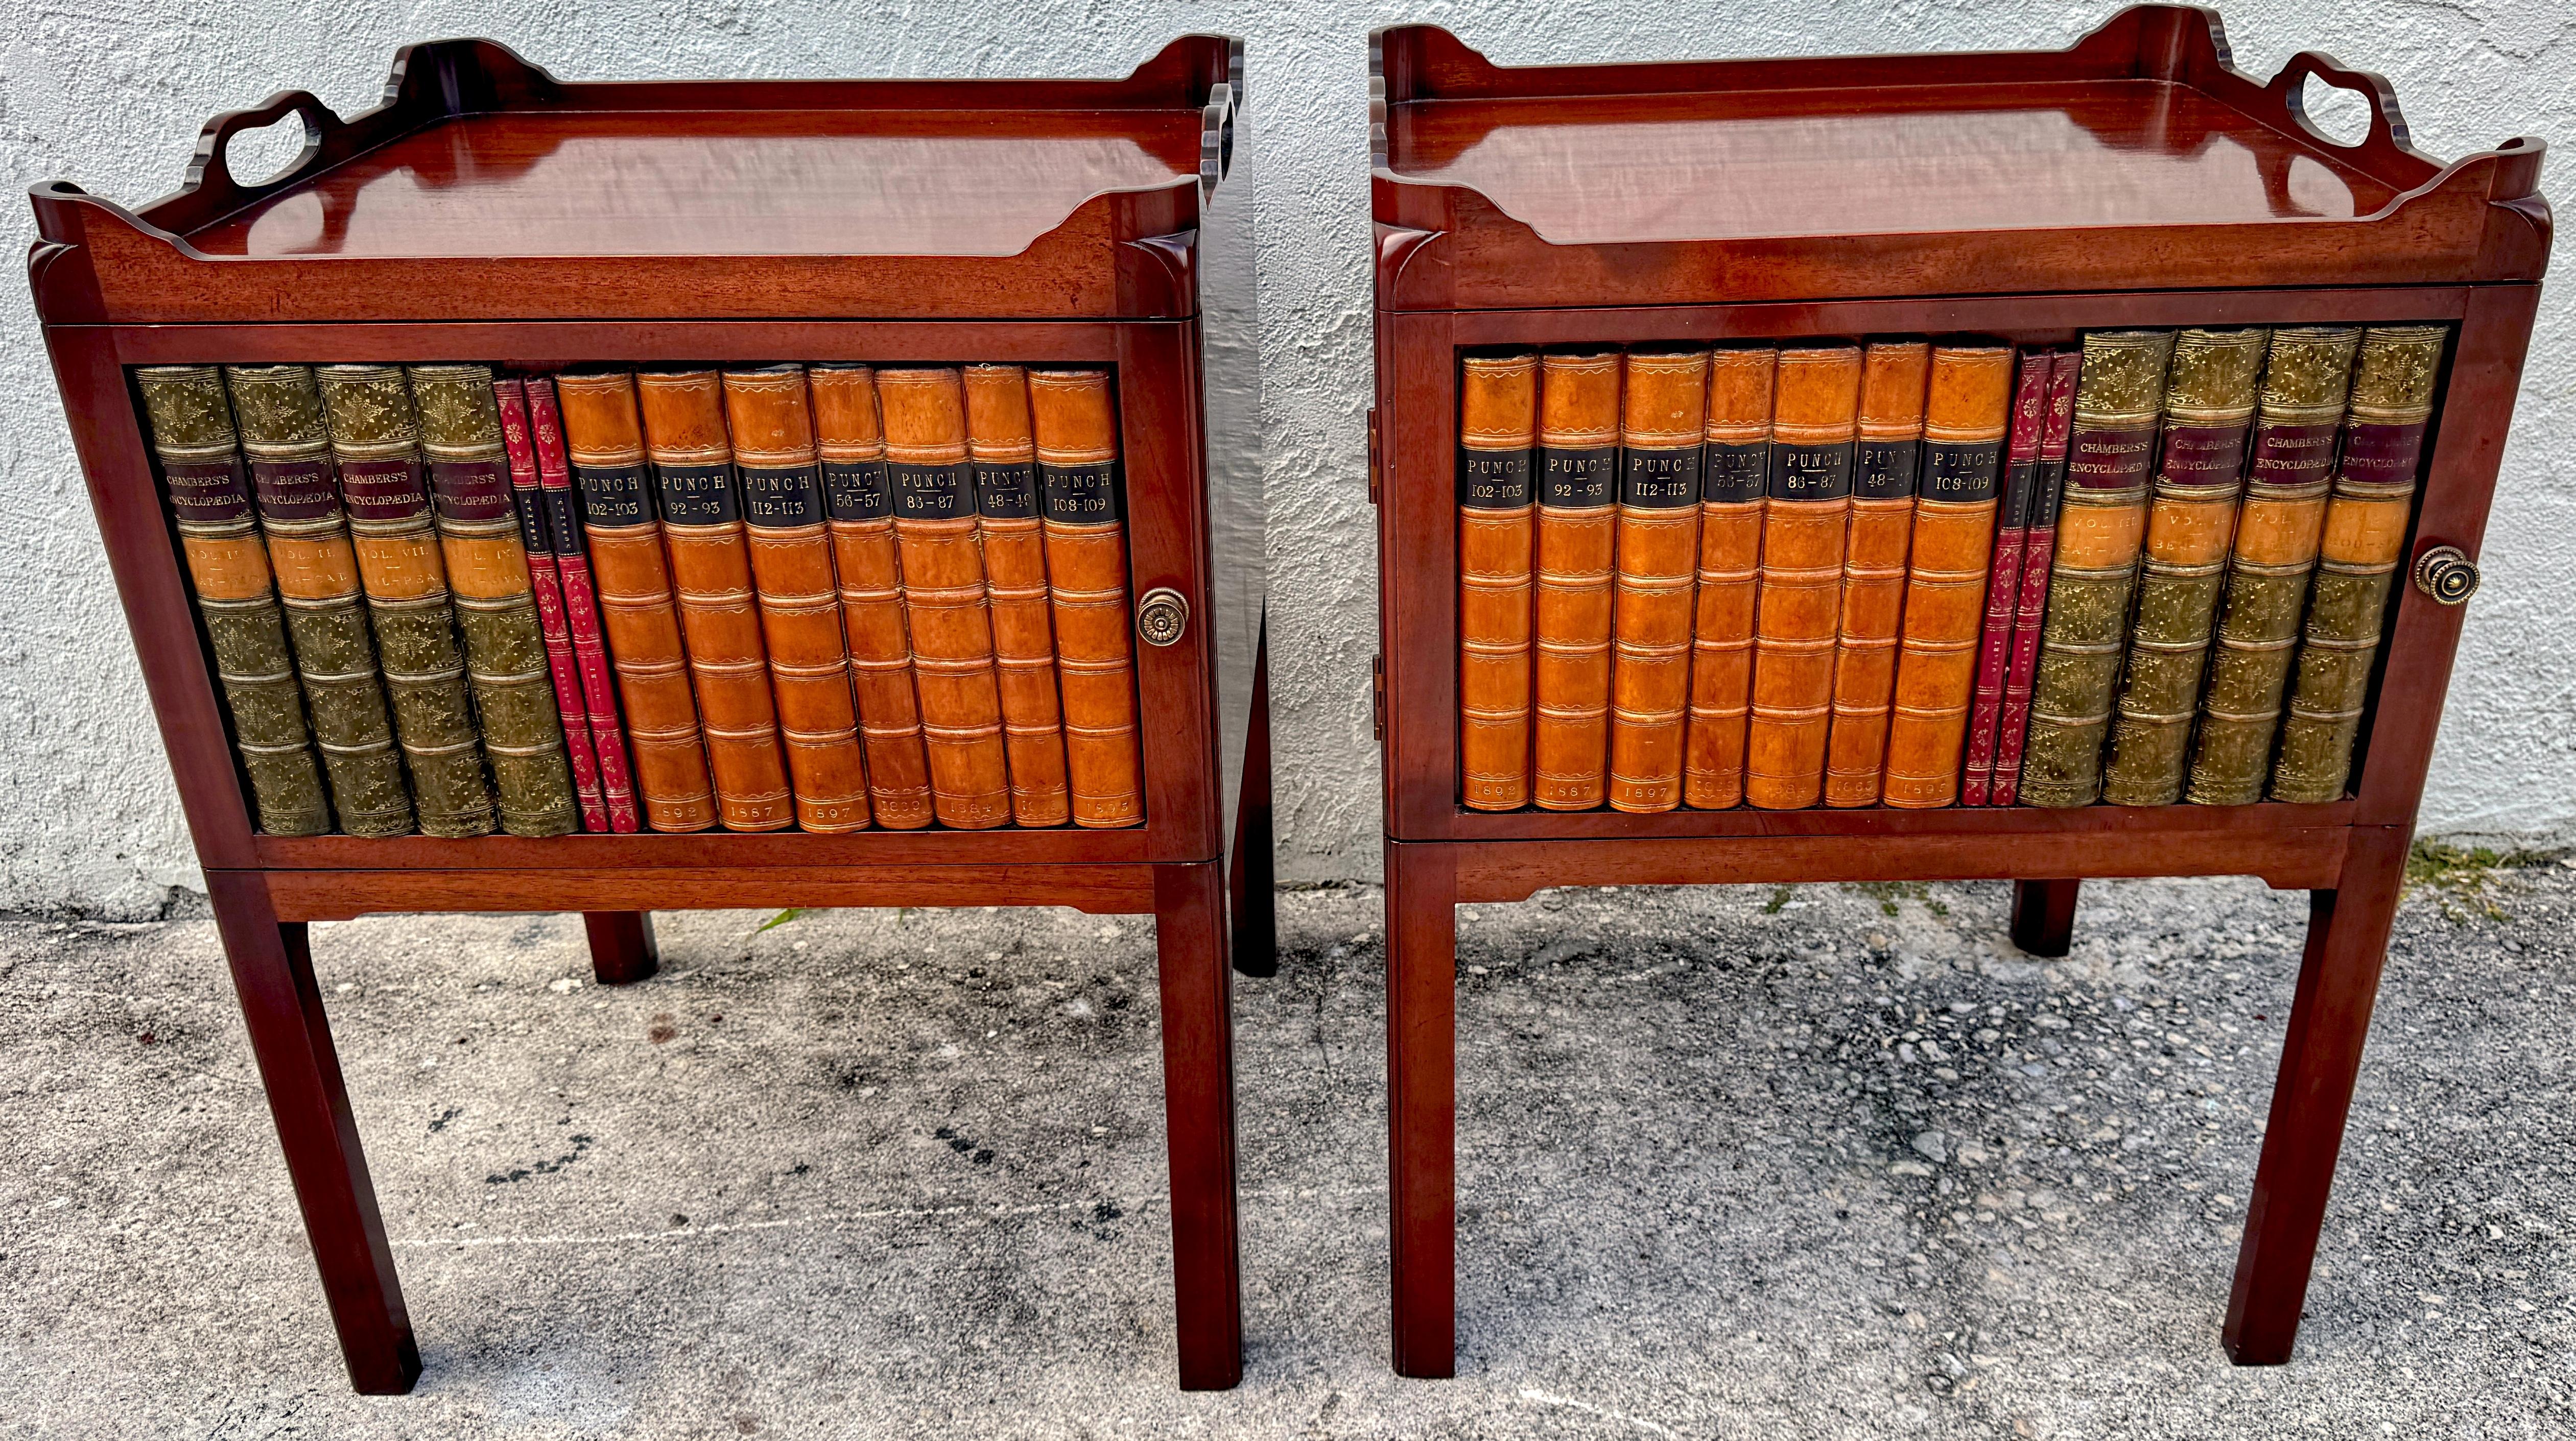 Pair of Georgian Style Mahogany and Leather Book Spine Front End Tables 
England, 20th century 

A striking pair of Georgian-style mahogany and leather book spine front end tables, crafted in England during the 20th century Each table exudes classic